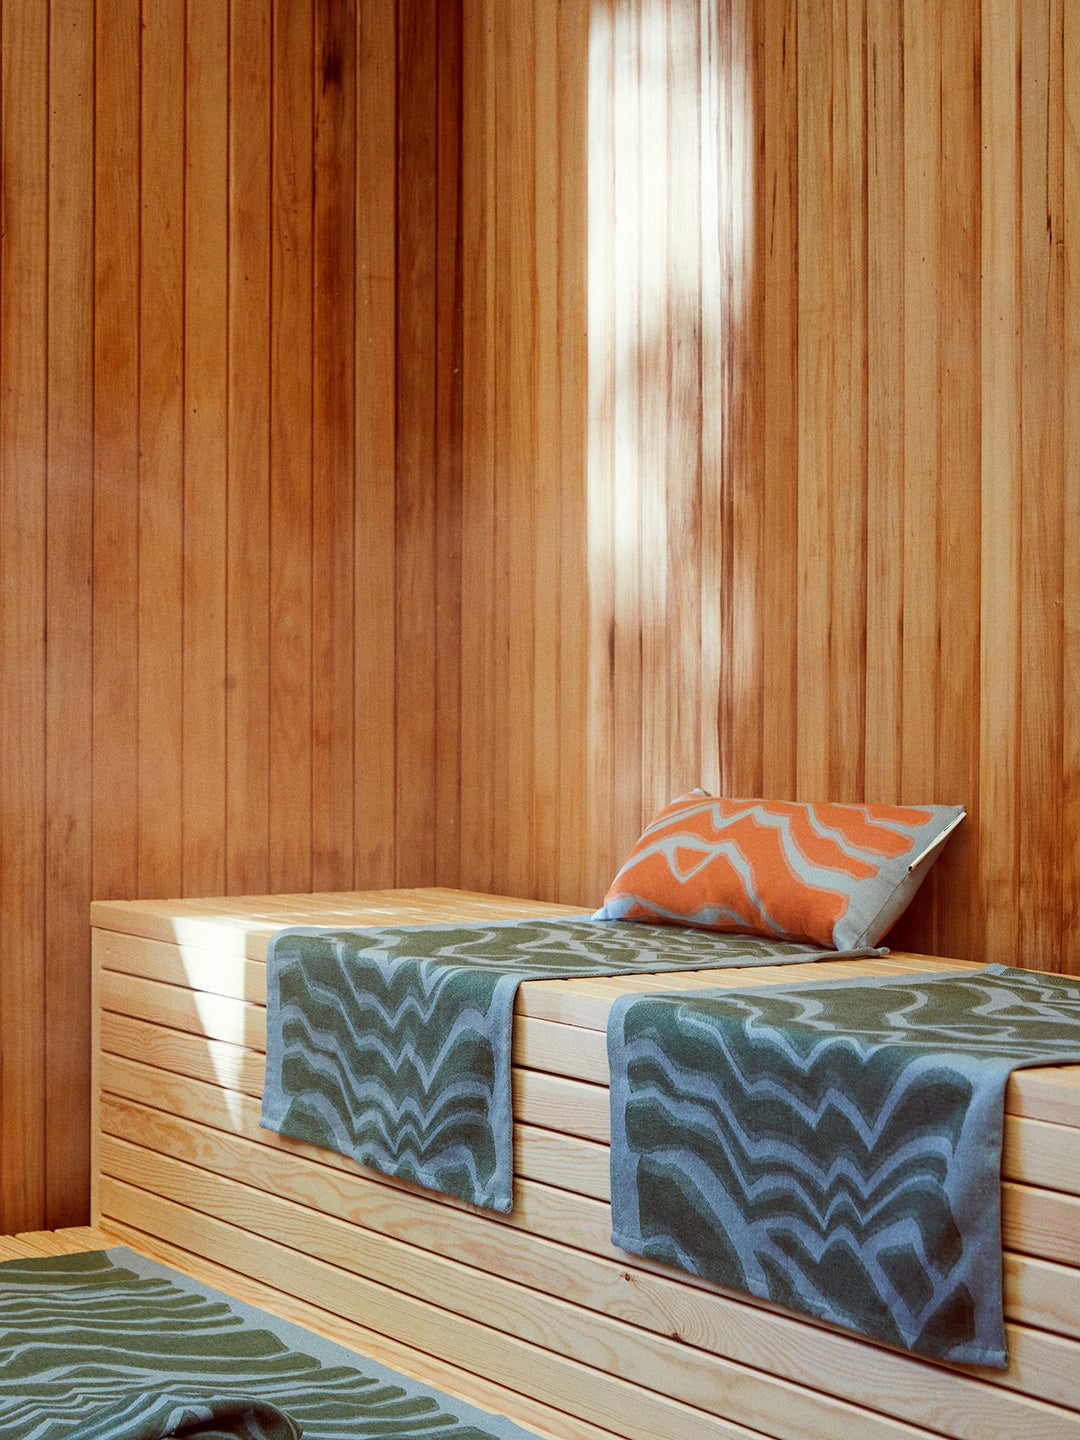 Sauna with towels and pillows